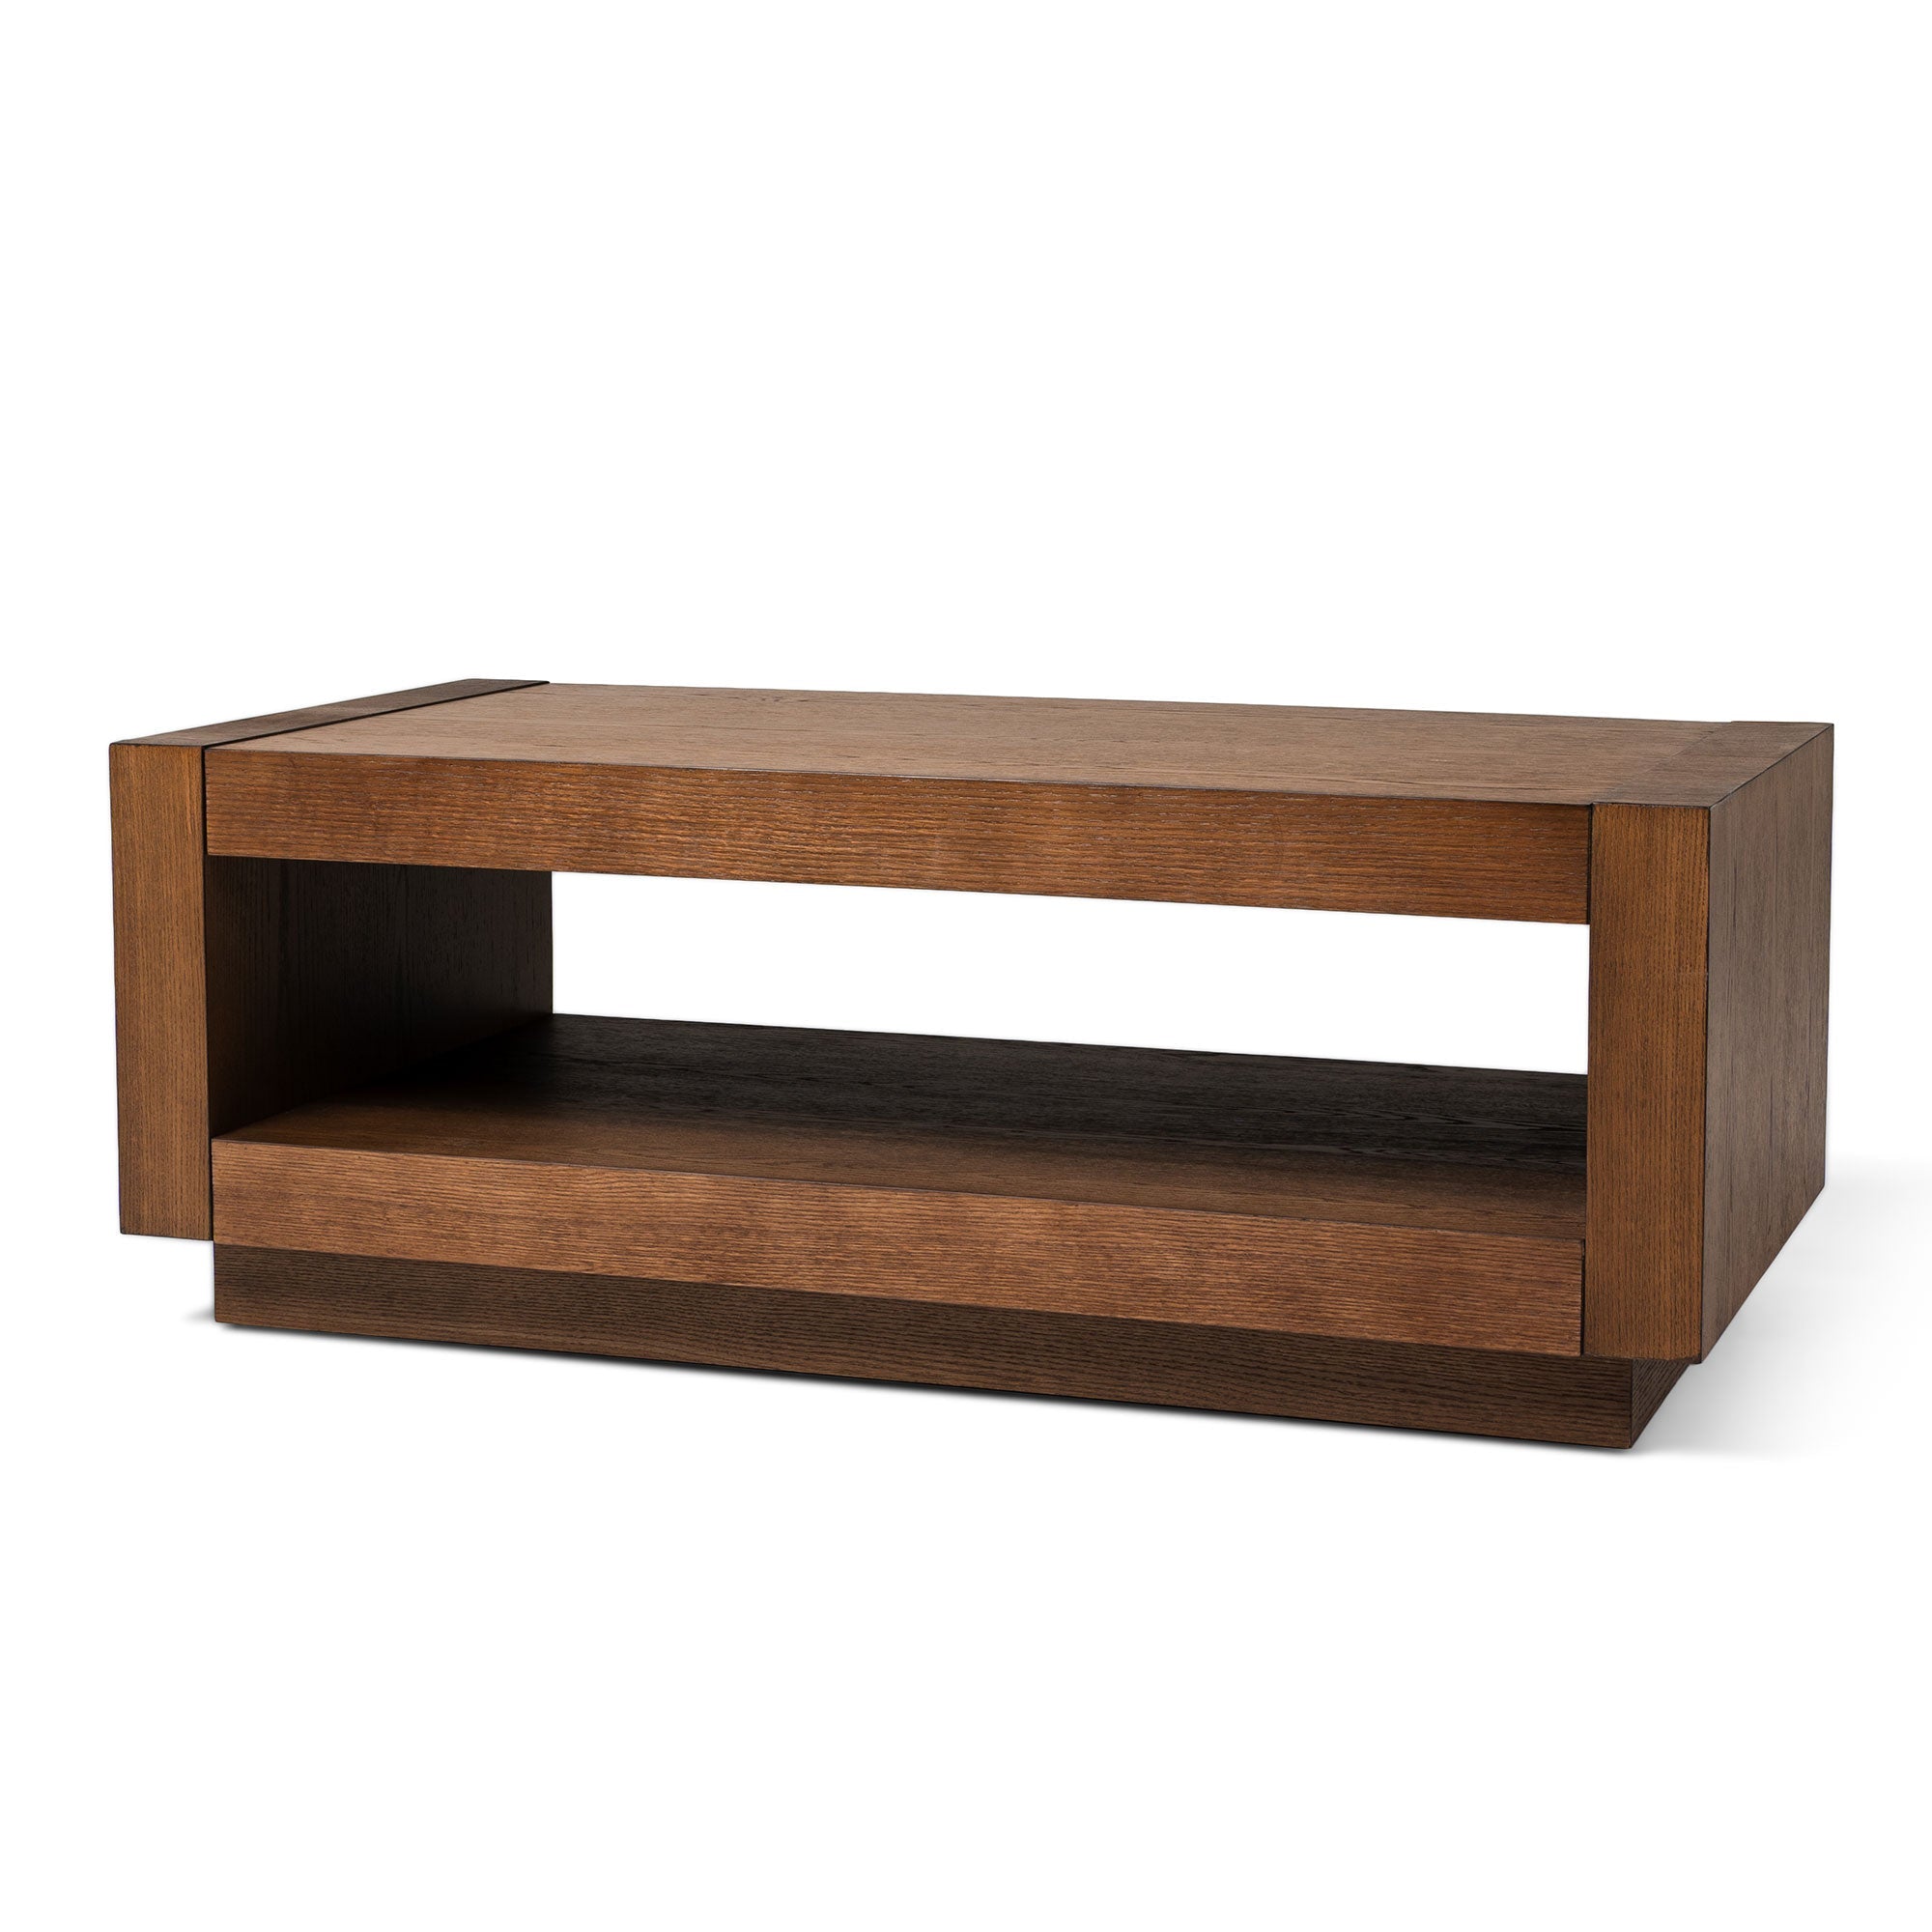 Artemis Contemporary Wooden Coffee Table in Refined Brown Finish